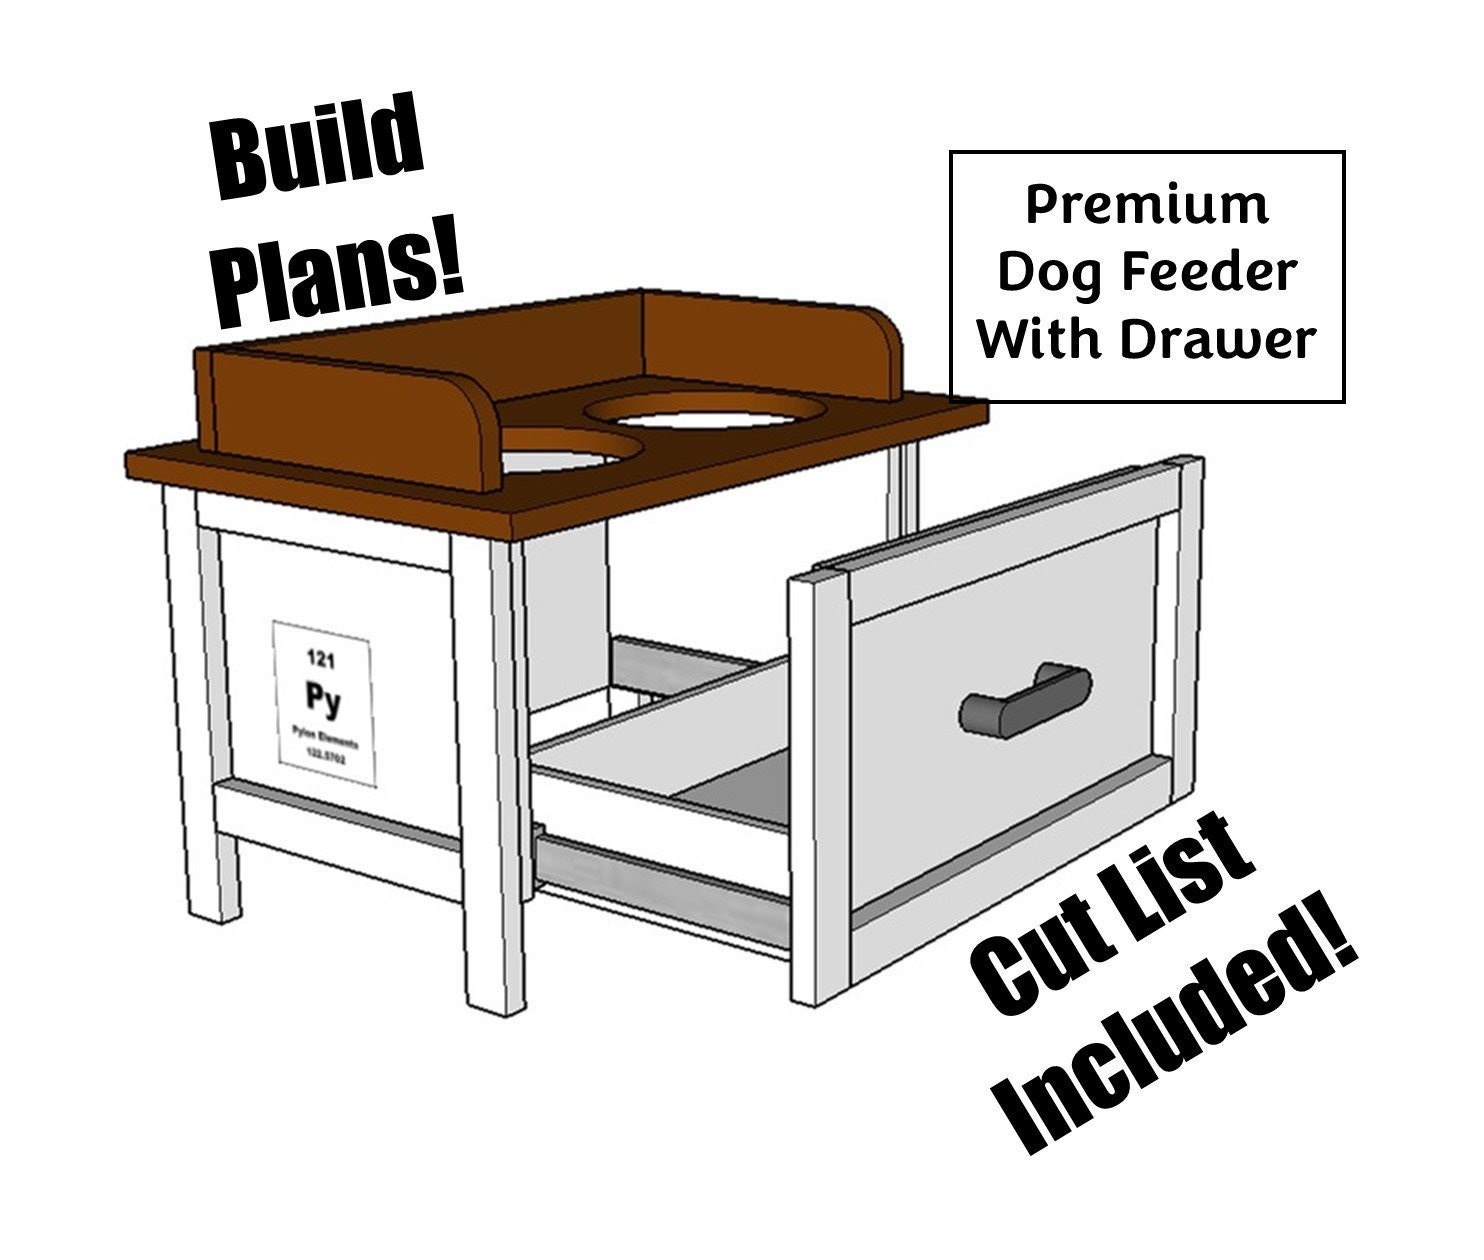 Dog Bowl Stand Plans, Free Garden Plans - How to build garden projects